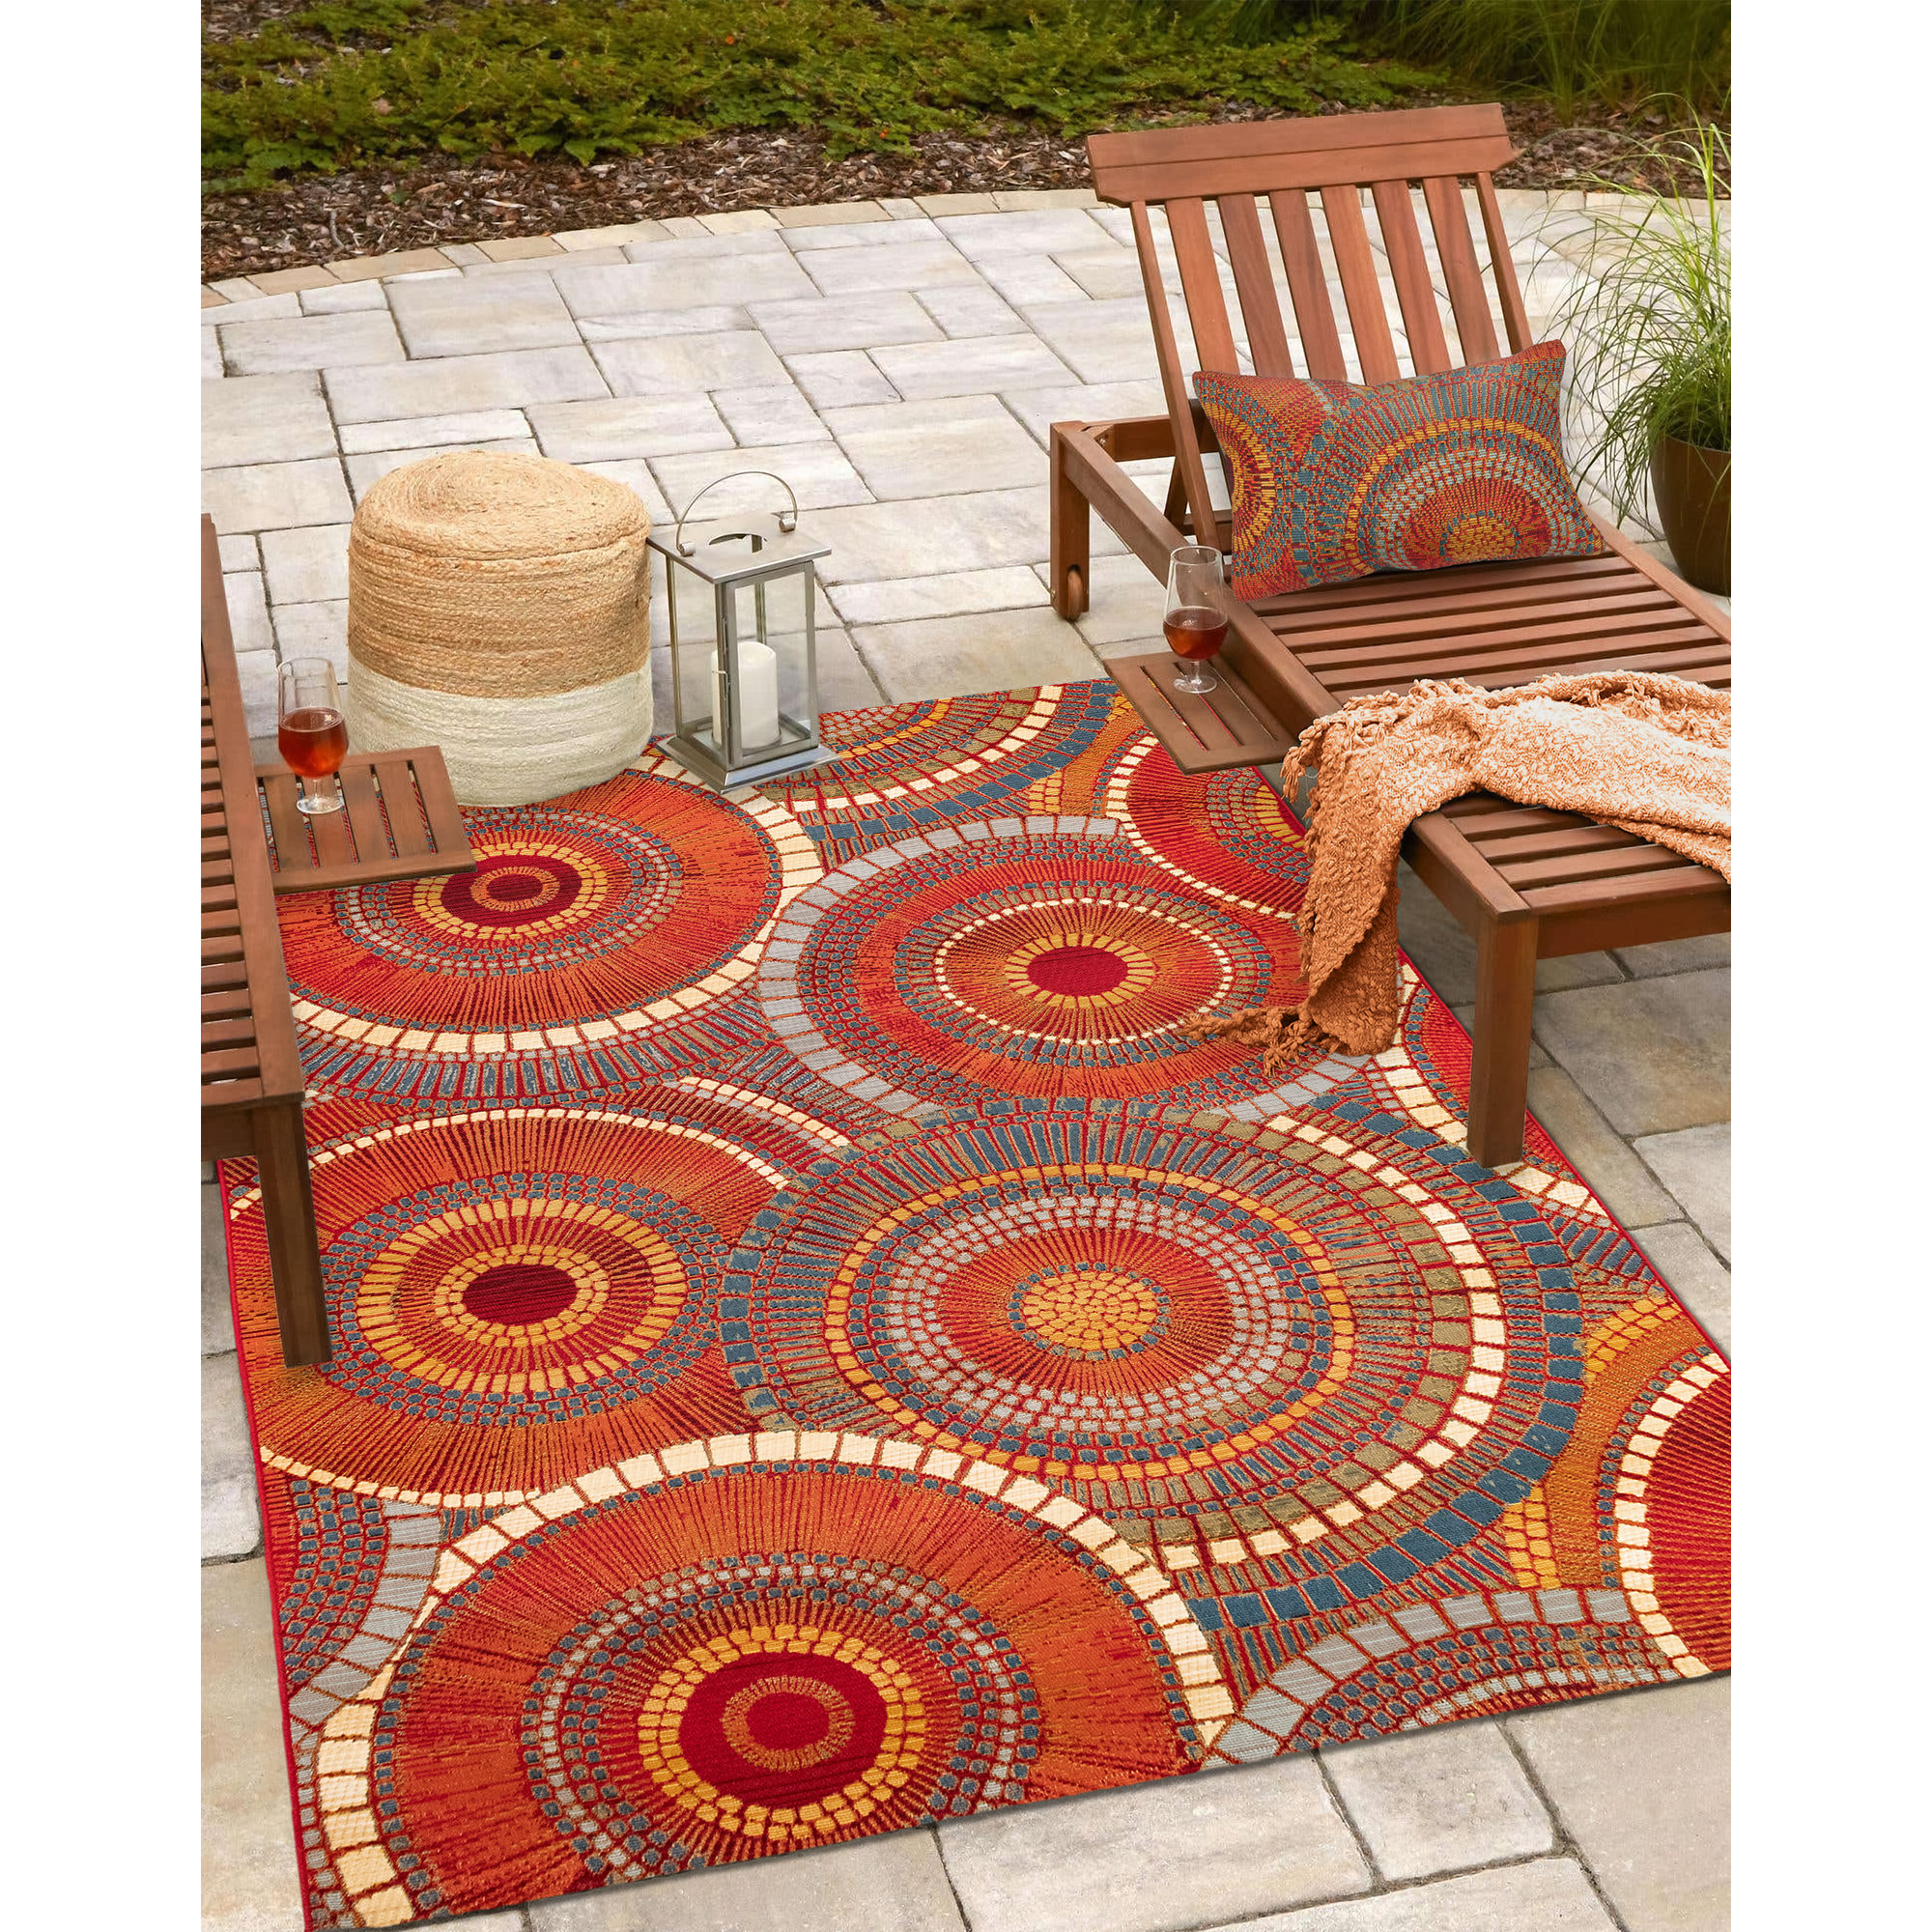 Cairo - Natural & Black Geometric Outdoor Rug for Patio